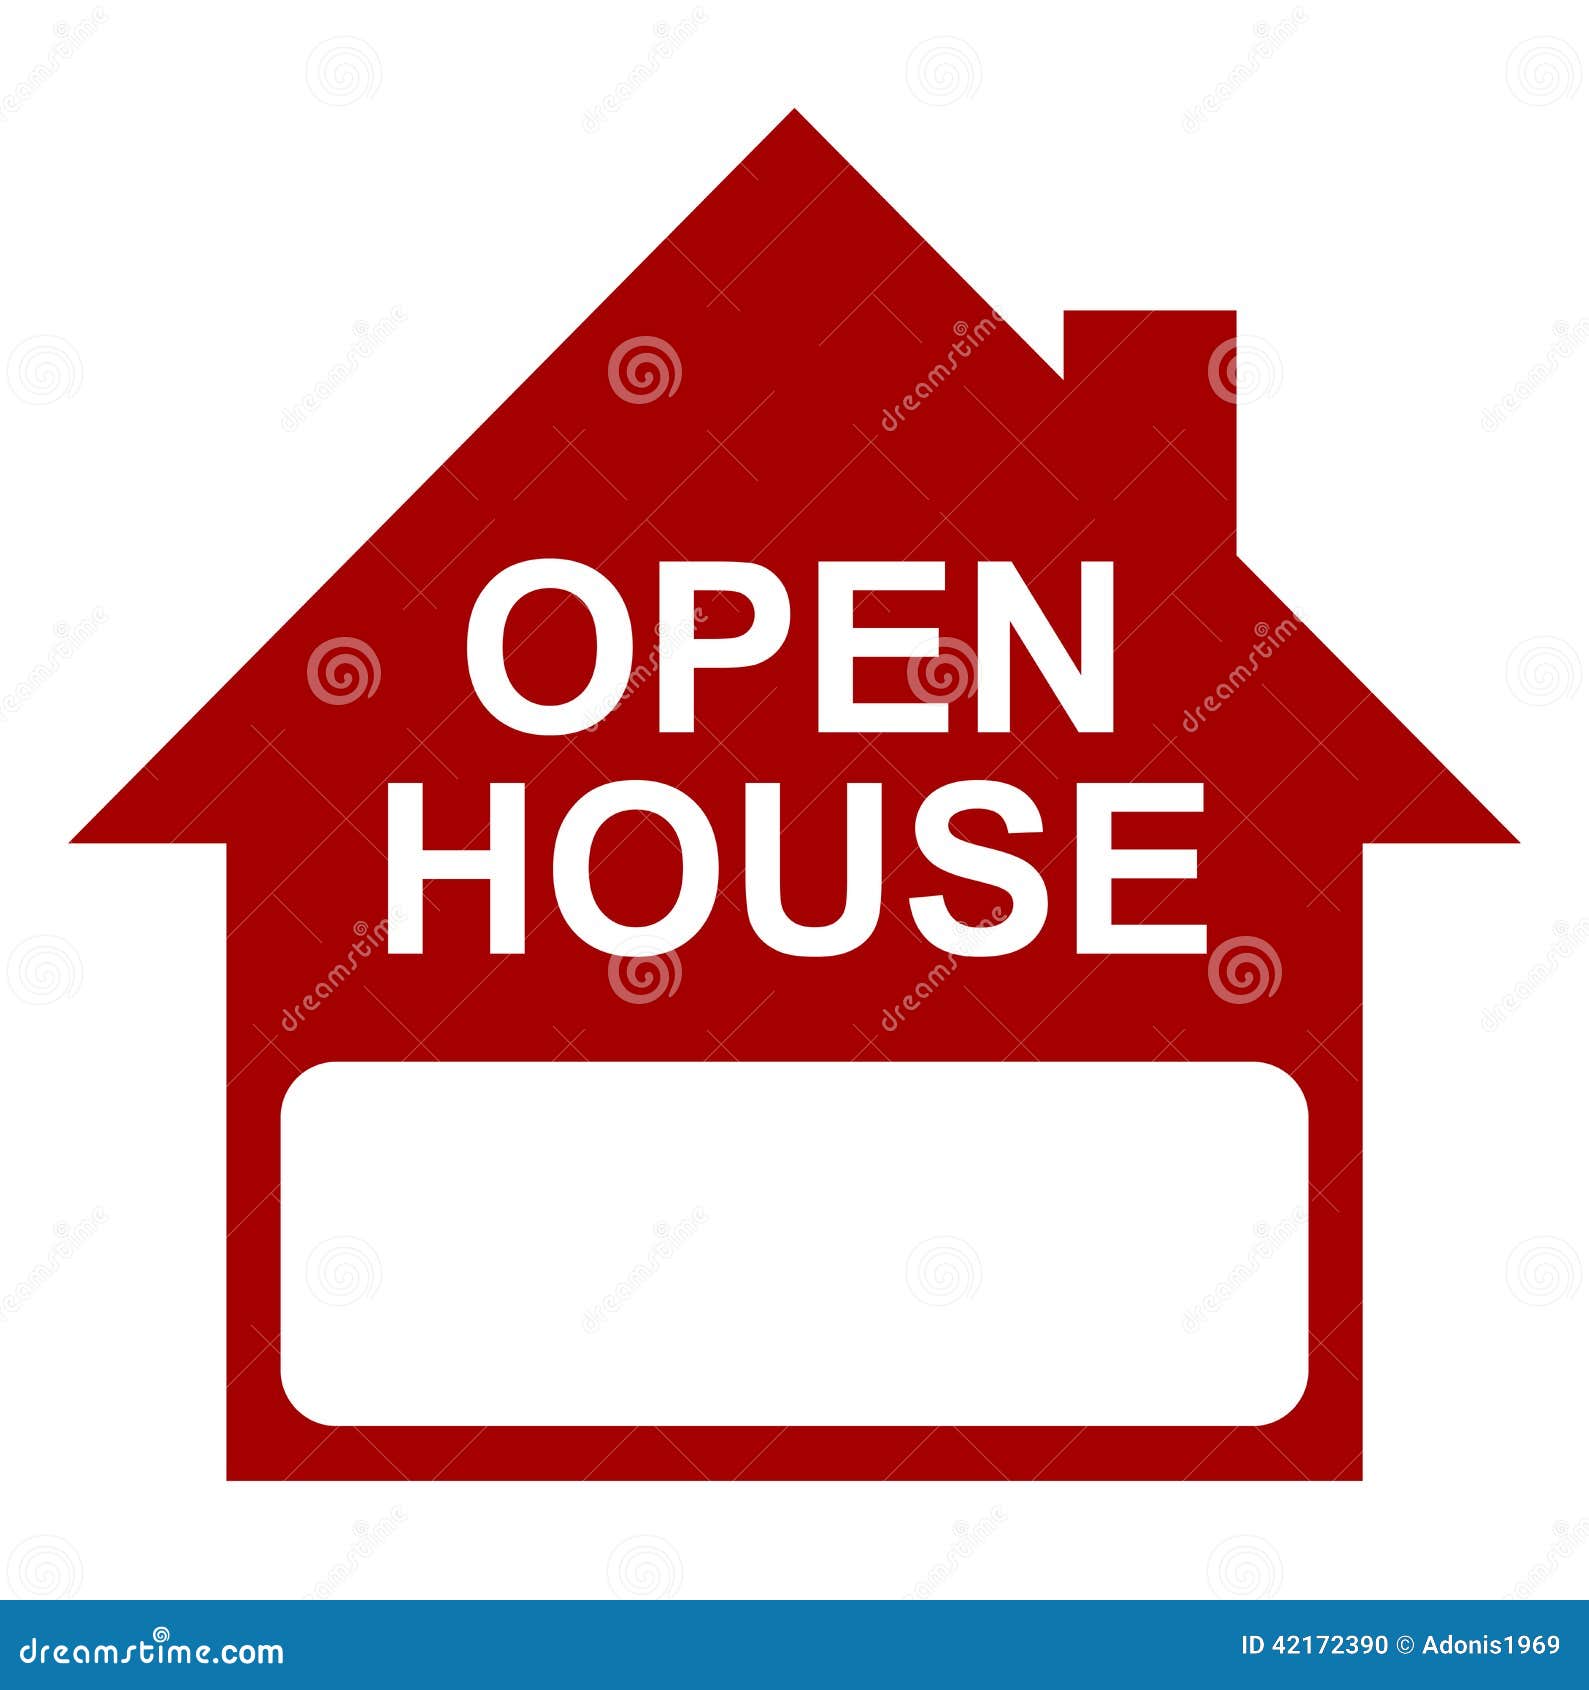 free clipart open house images - photo #21